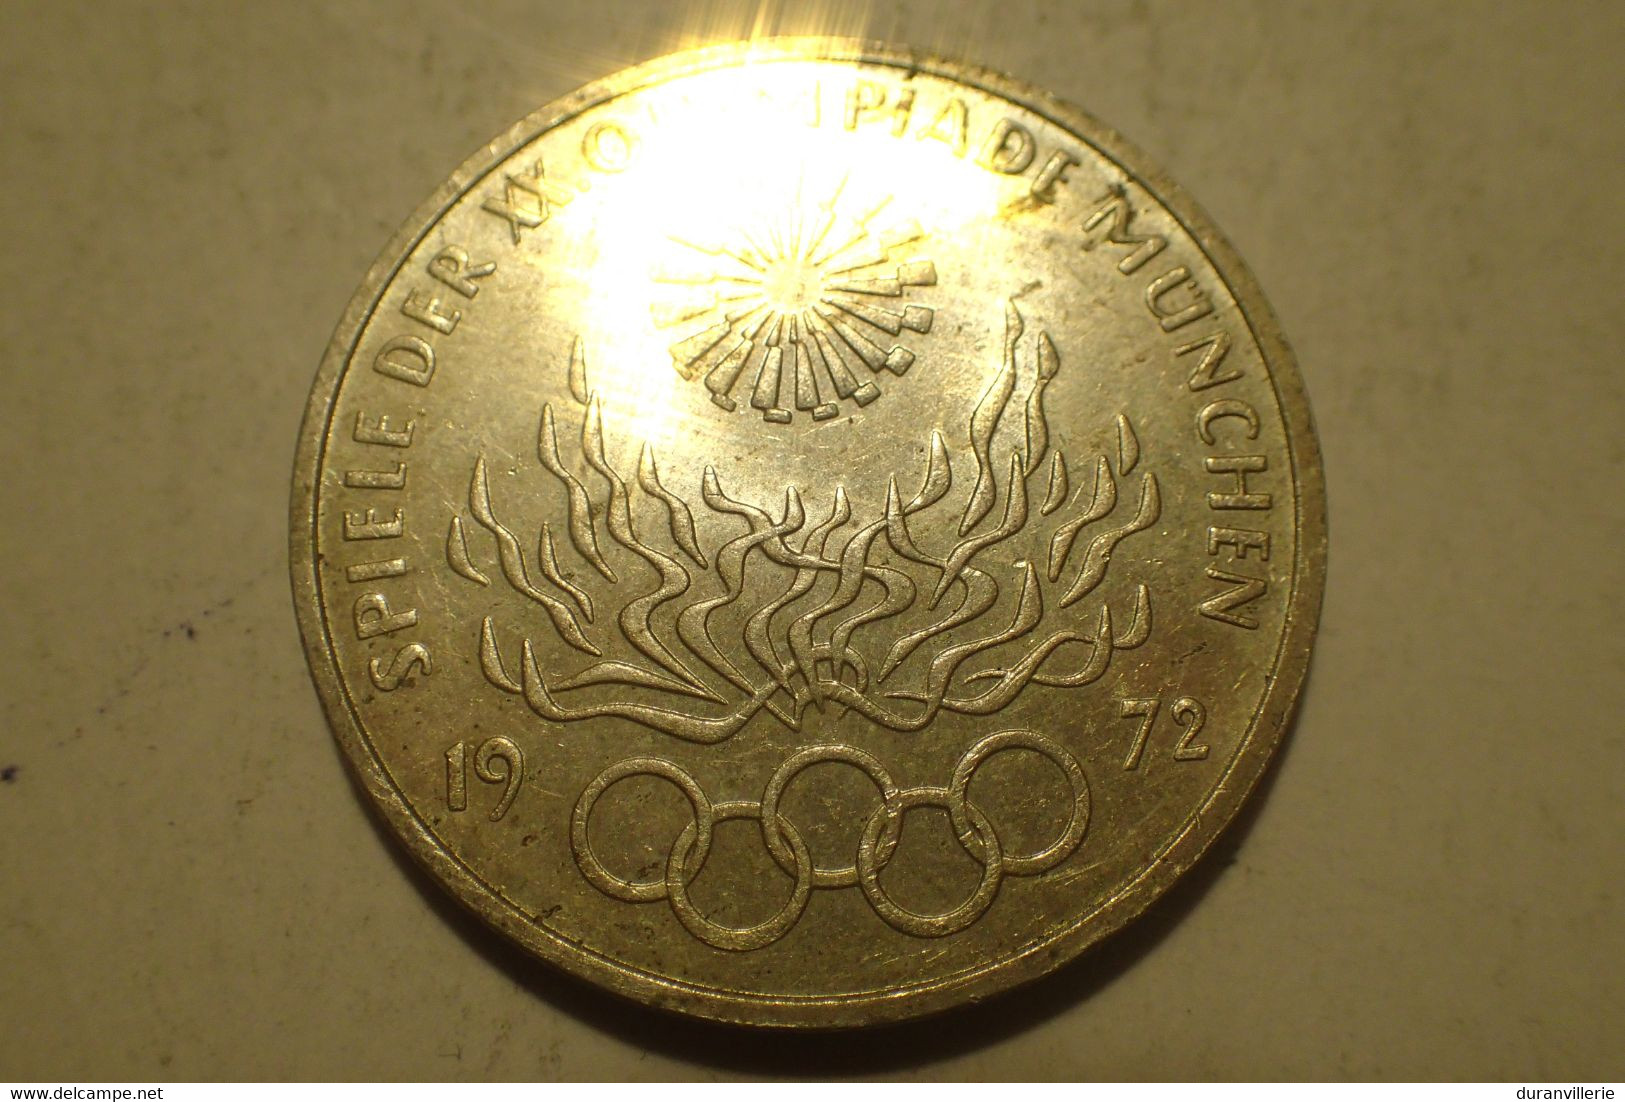 10 Mark Allemagne / Germany 1972 JO - Jeux Olympiques / Olympic Games - Munchen Munich - Argent / Silver SUP - Sammlungen